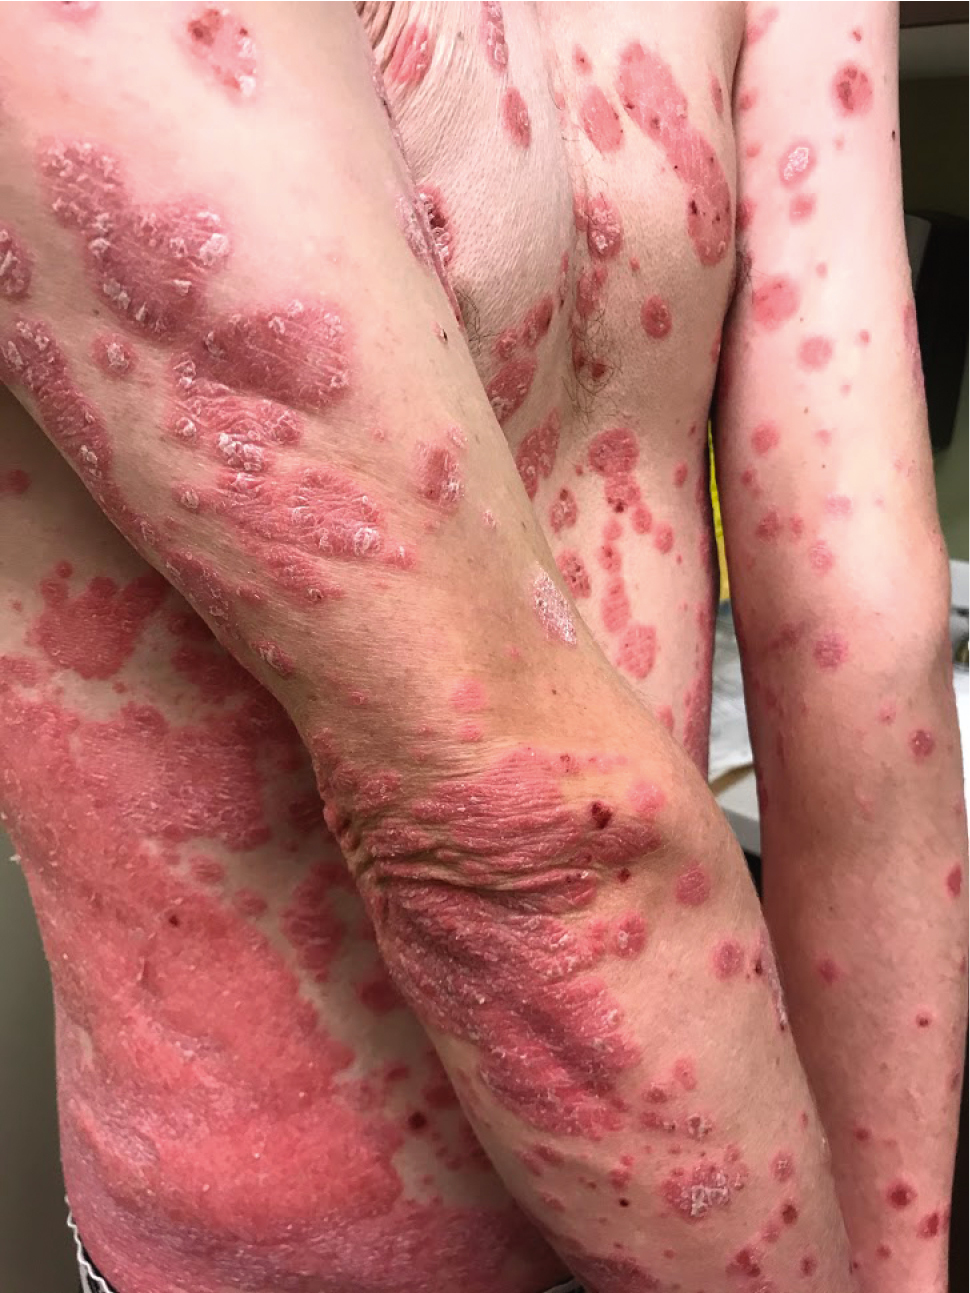 Figure 031_9170.  Plaque-type psoriasis with well-defined erythematous plaques with whitish-silvery scales.  Photograph courtesy of Dr Mohannad Abu-Hilal.  